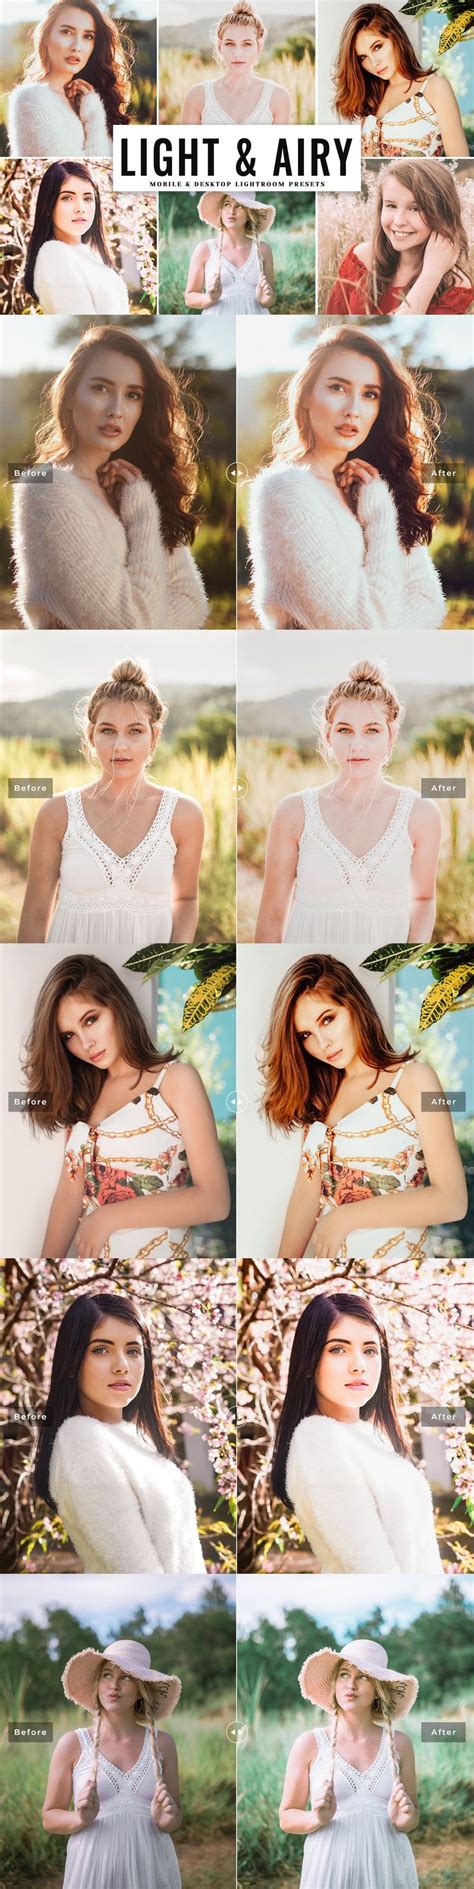 The light set (15 presets) offers. Light & Airy Lightroom Presets | Lightroom presets ...